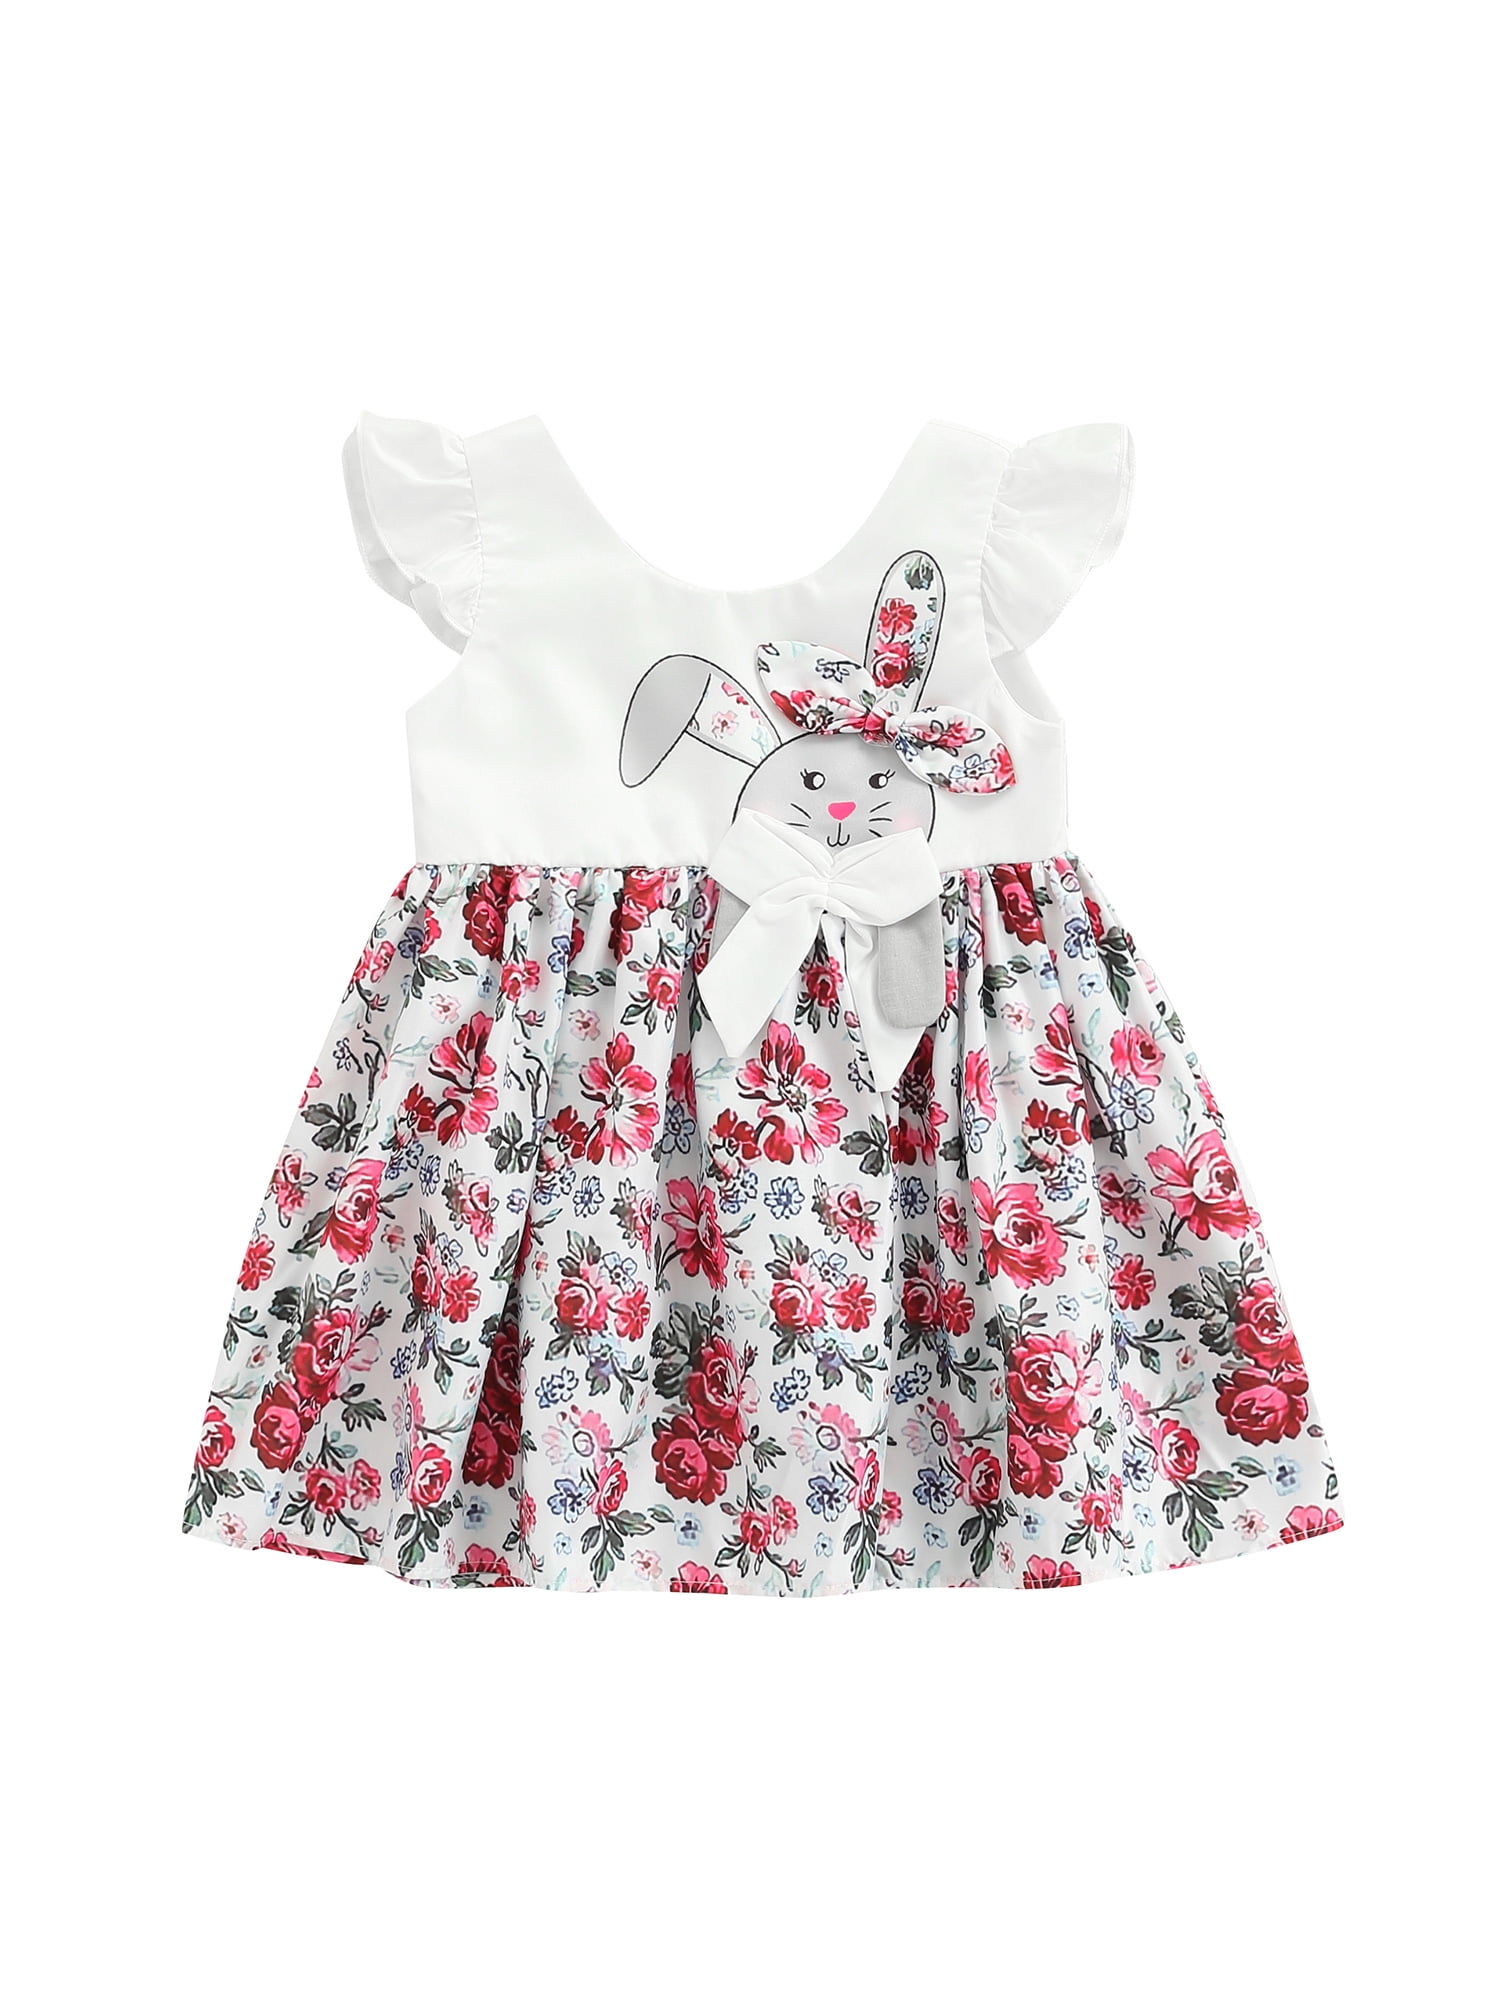 Baby Girls Floral Summer Sleeveless Dress 3 Piece Outfit Set Matching Hairband and Knickers Ruffles White red Navy Cherries Flowers